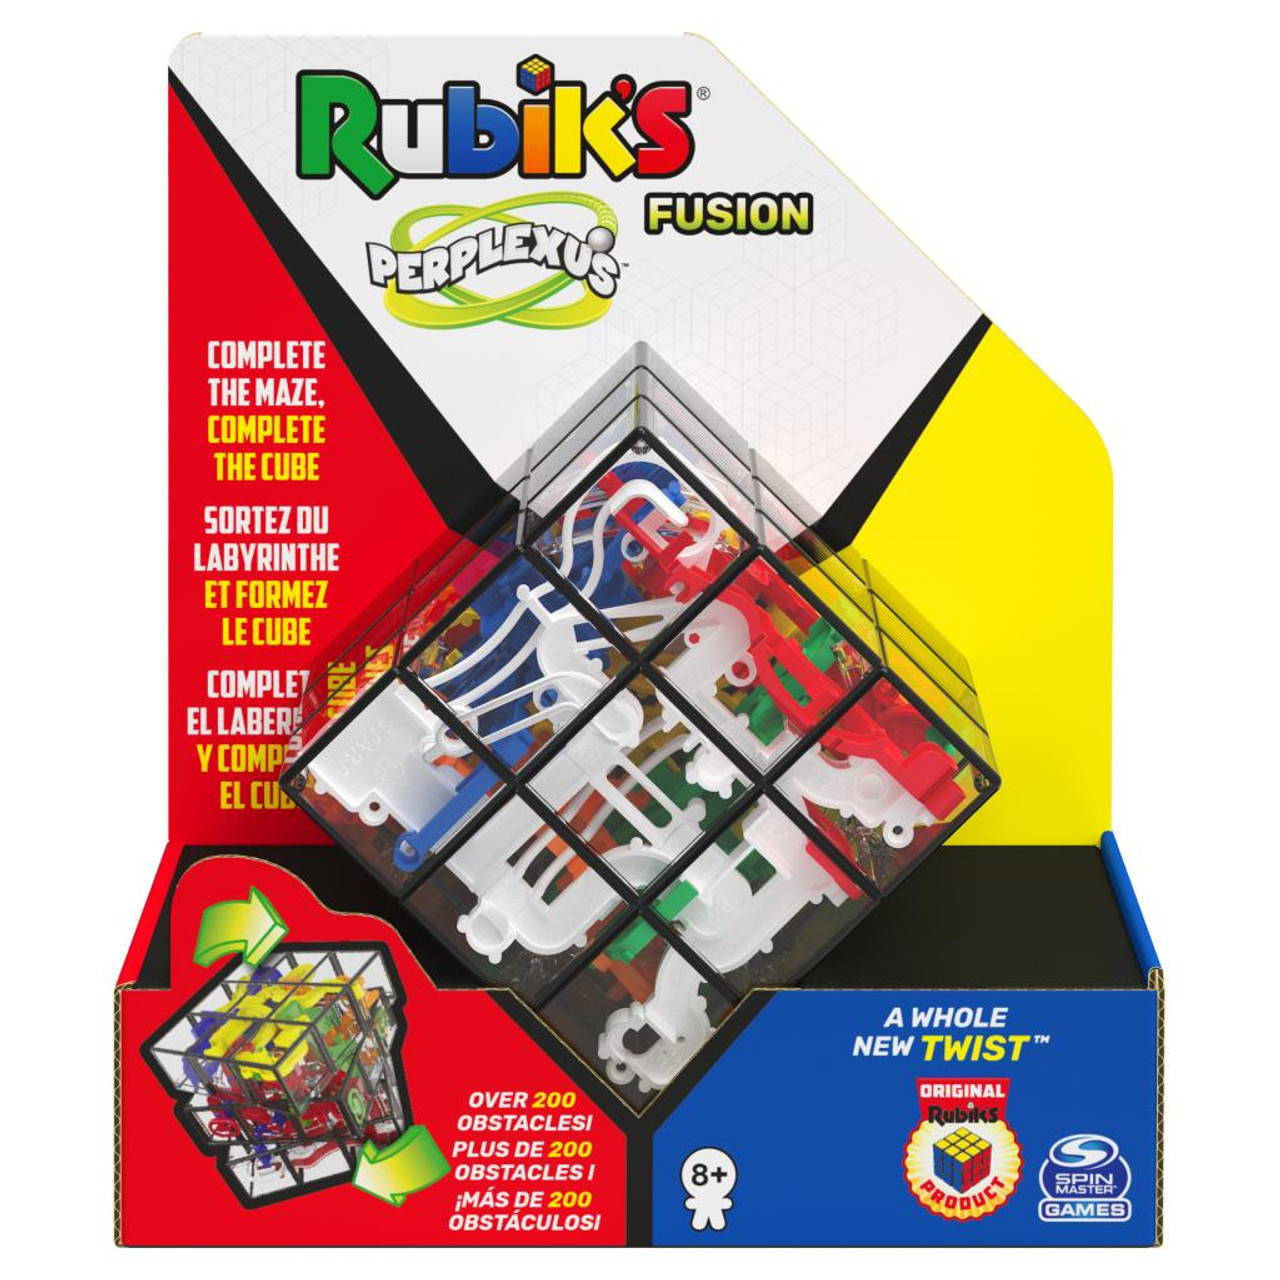 How to play Rubik's Perplexus Hybrid from Spin Master Games 